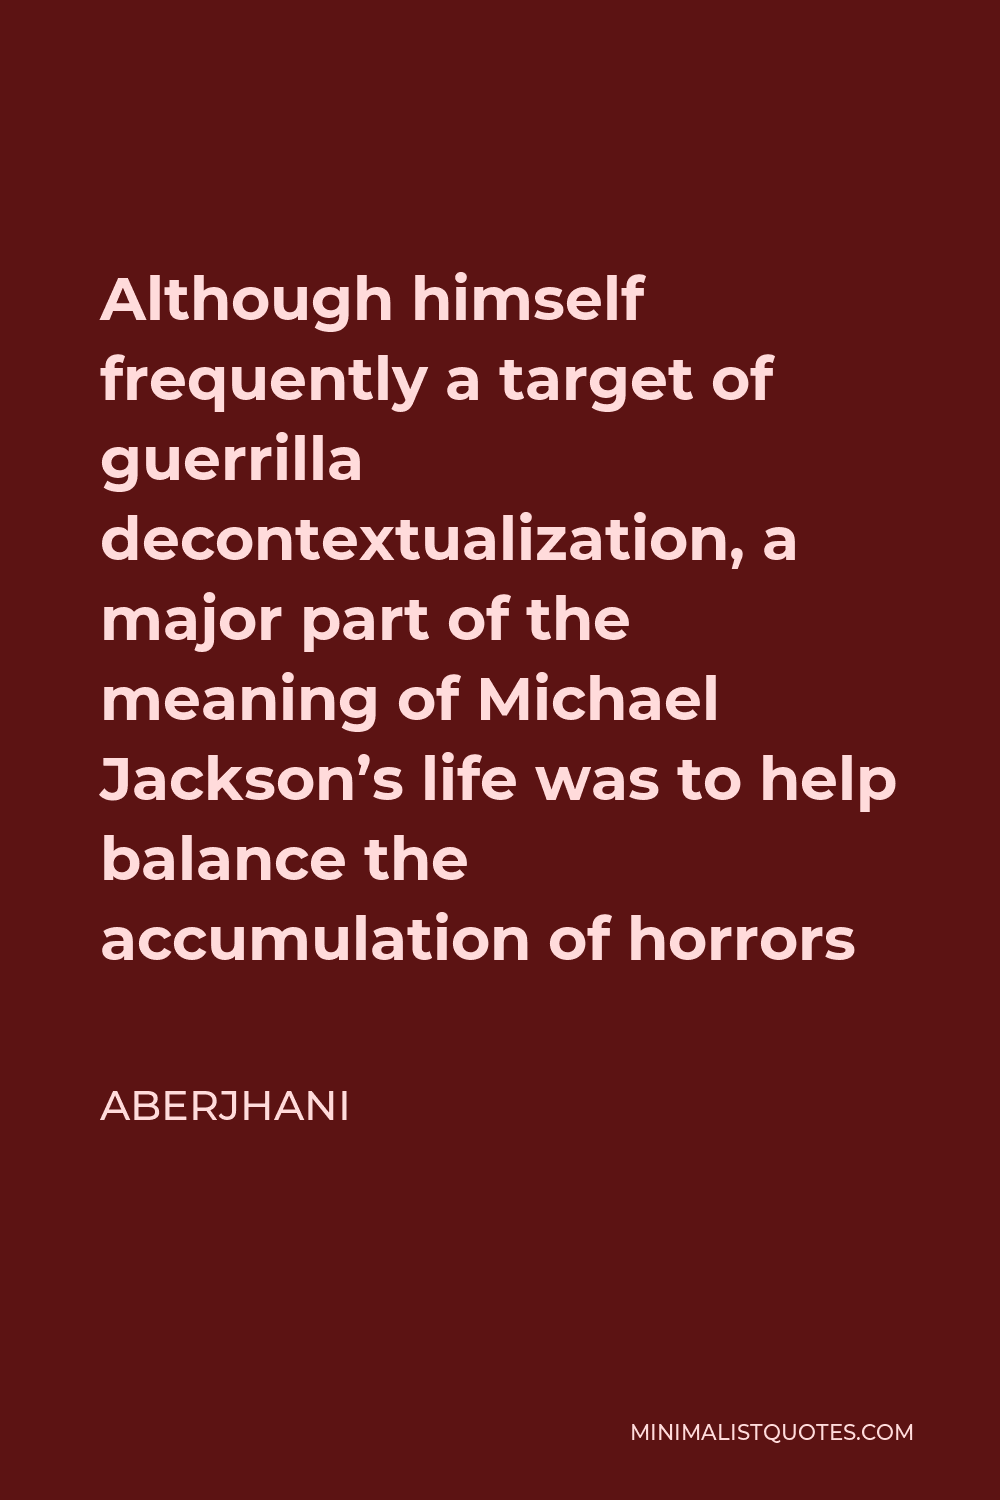 Aberjhani Quote - Although himself frequently a target of guerrilla decontextualization, a major part of the meaning of Michael Jackson’s life was to help balance the accumulation of horrors